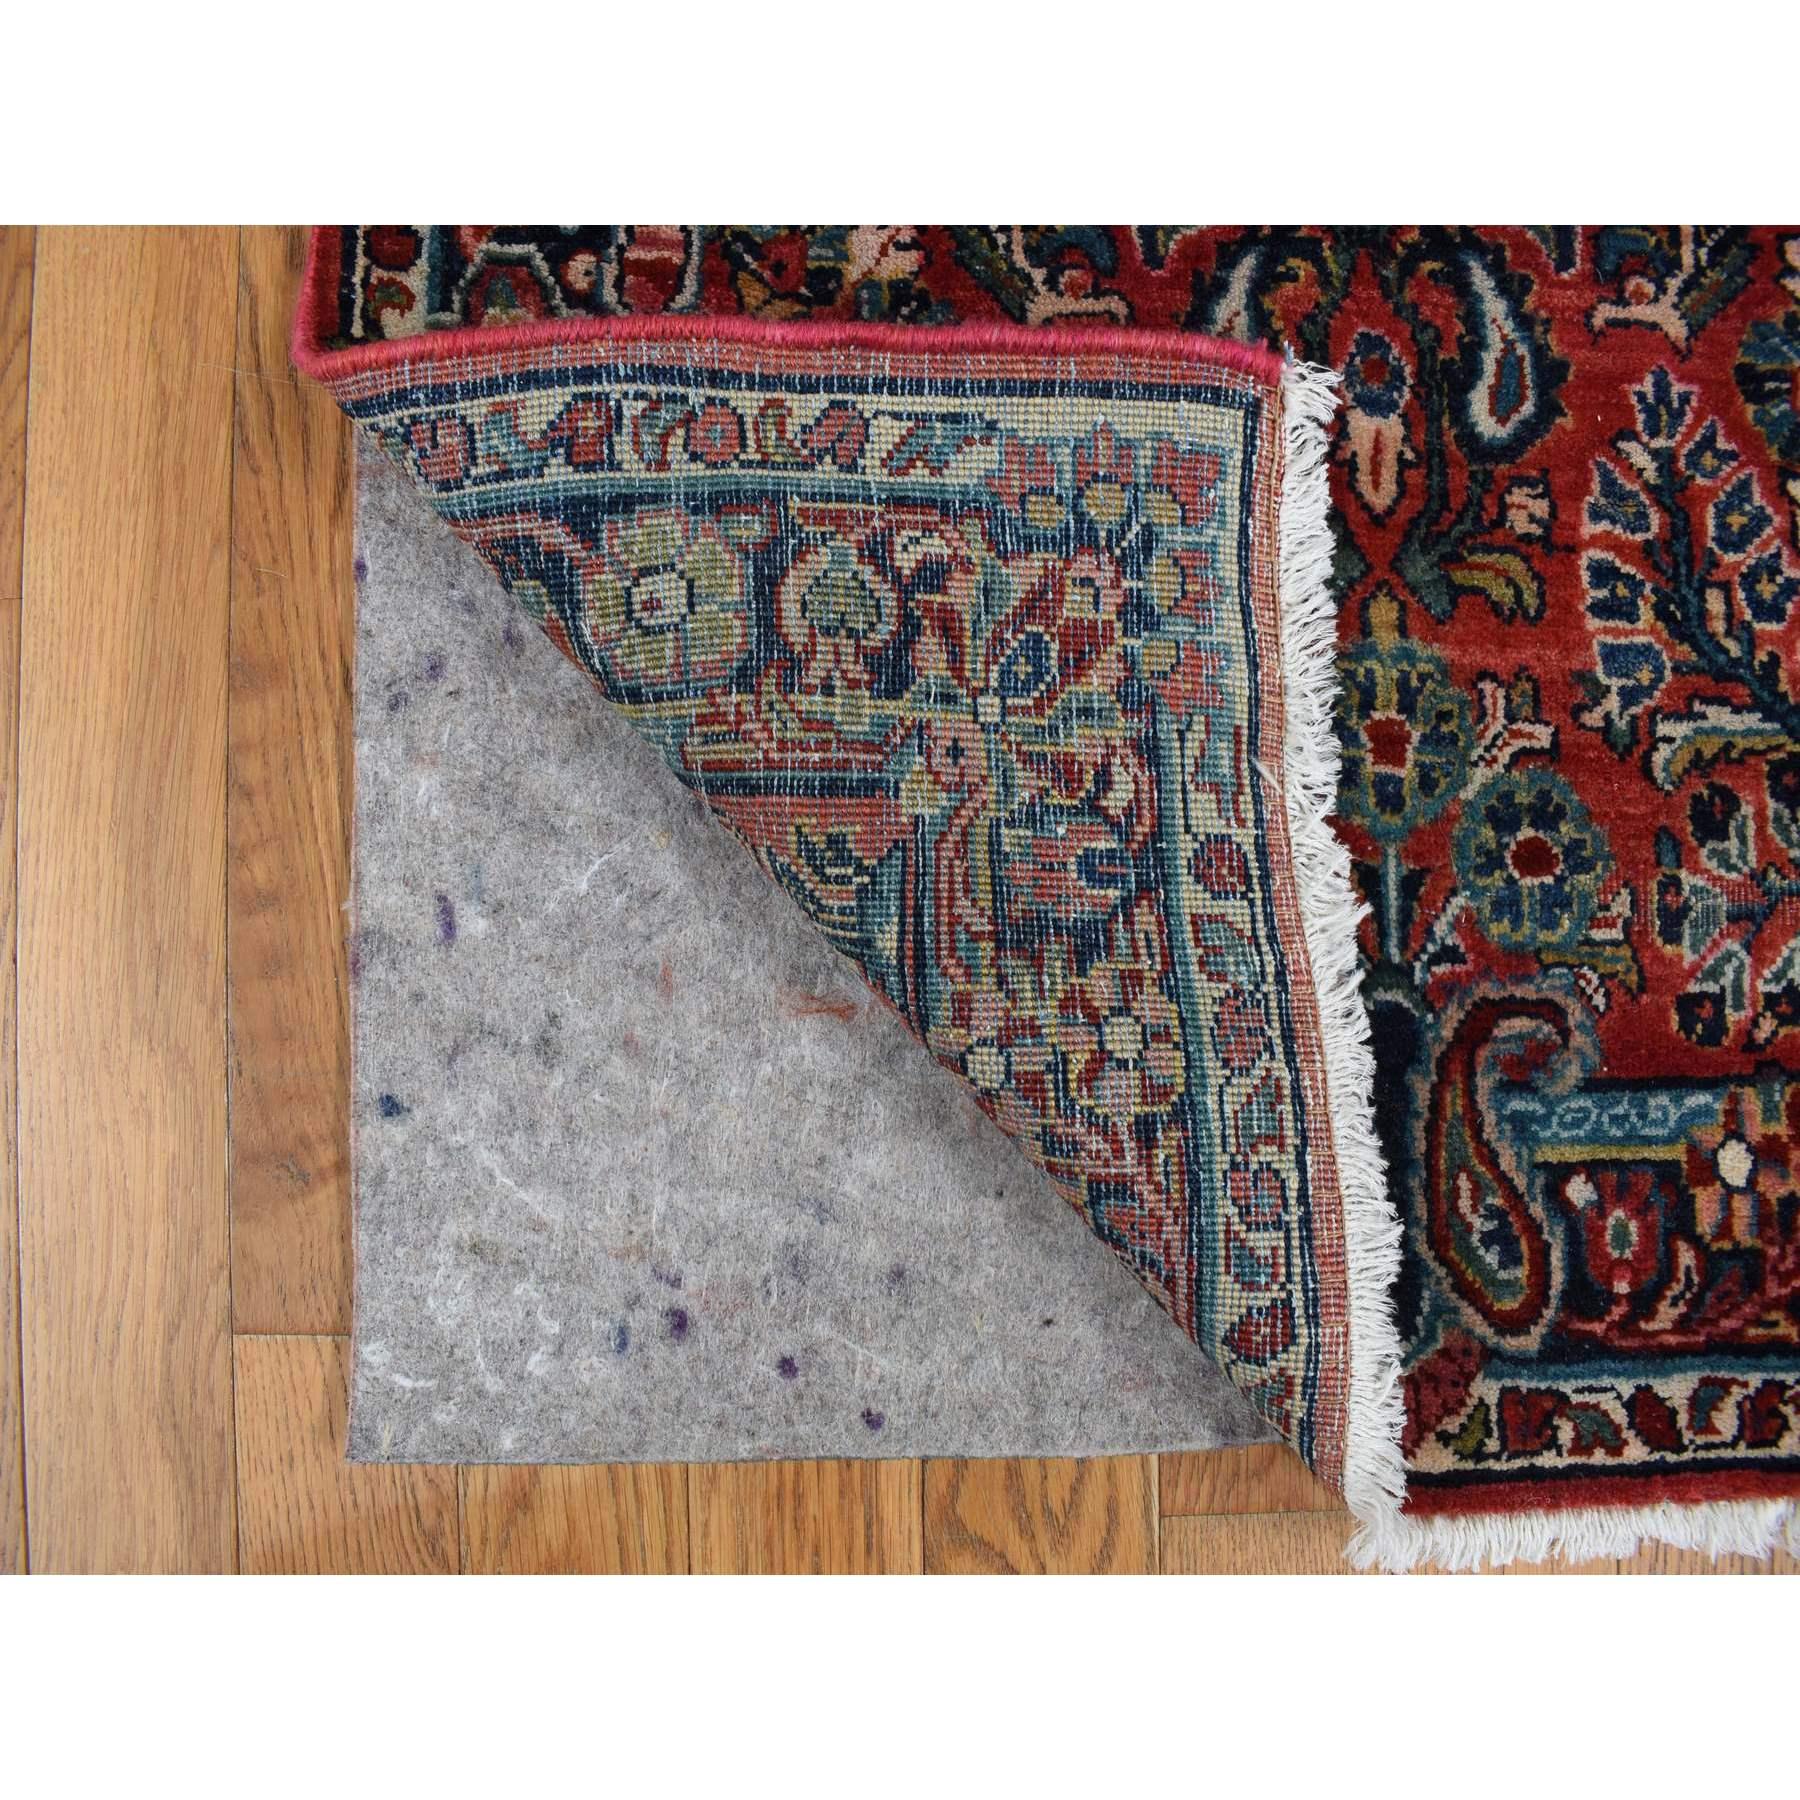 Medieval Red Antique Persian Saroogh Hand Knotted Wool Cleaned XL Runner Rug 2'6